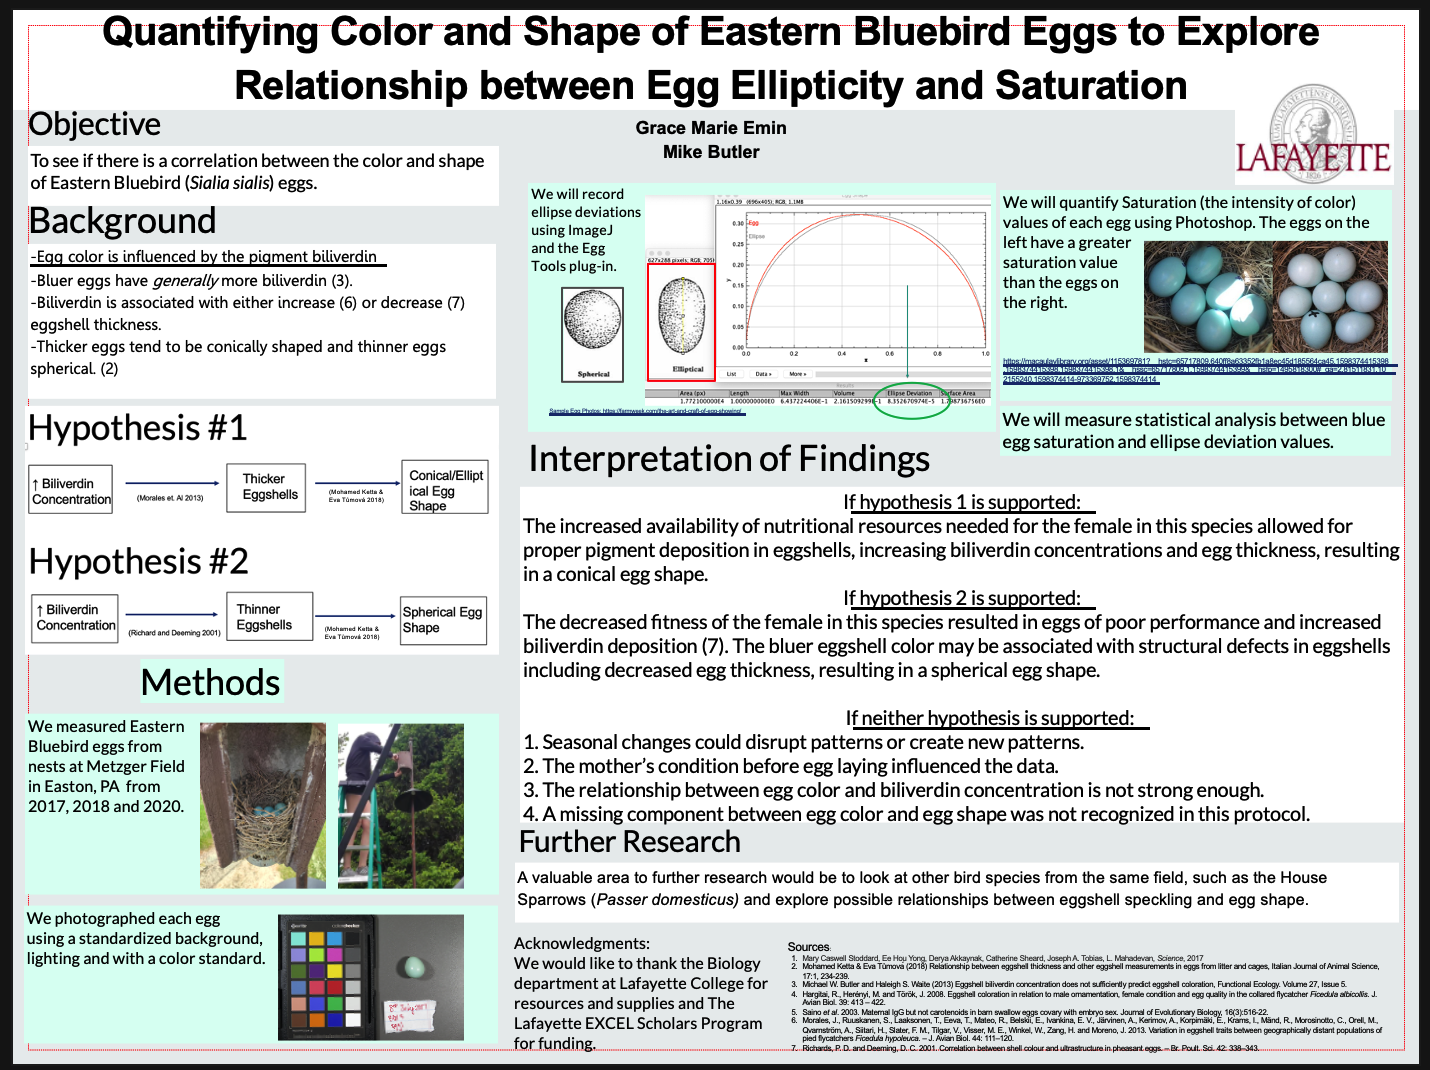 Showcase Image for Quantifying Color and Shape of Eastern Bluebird Eggs to Explore Relationship between Egg Ellipticity and Saturation